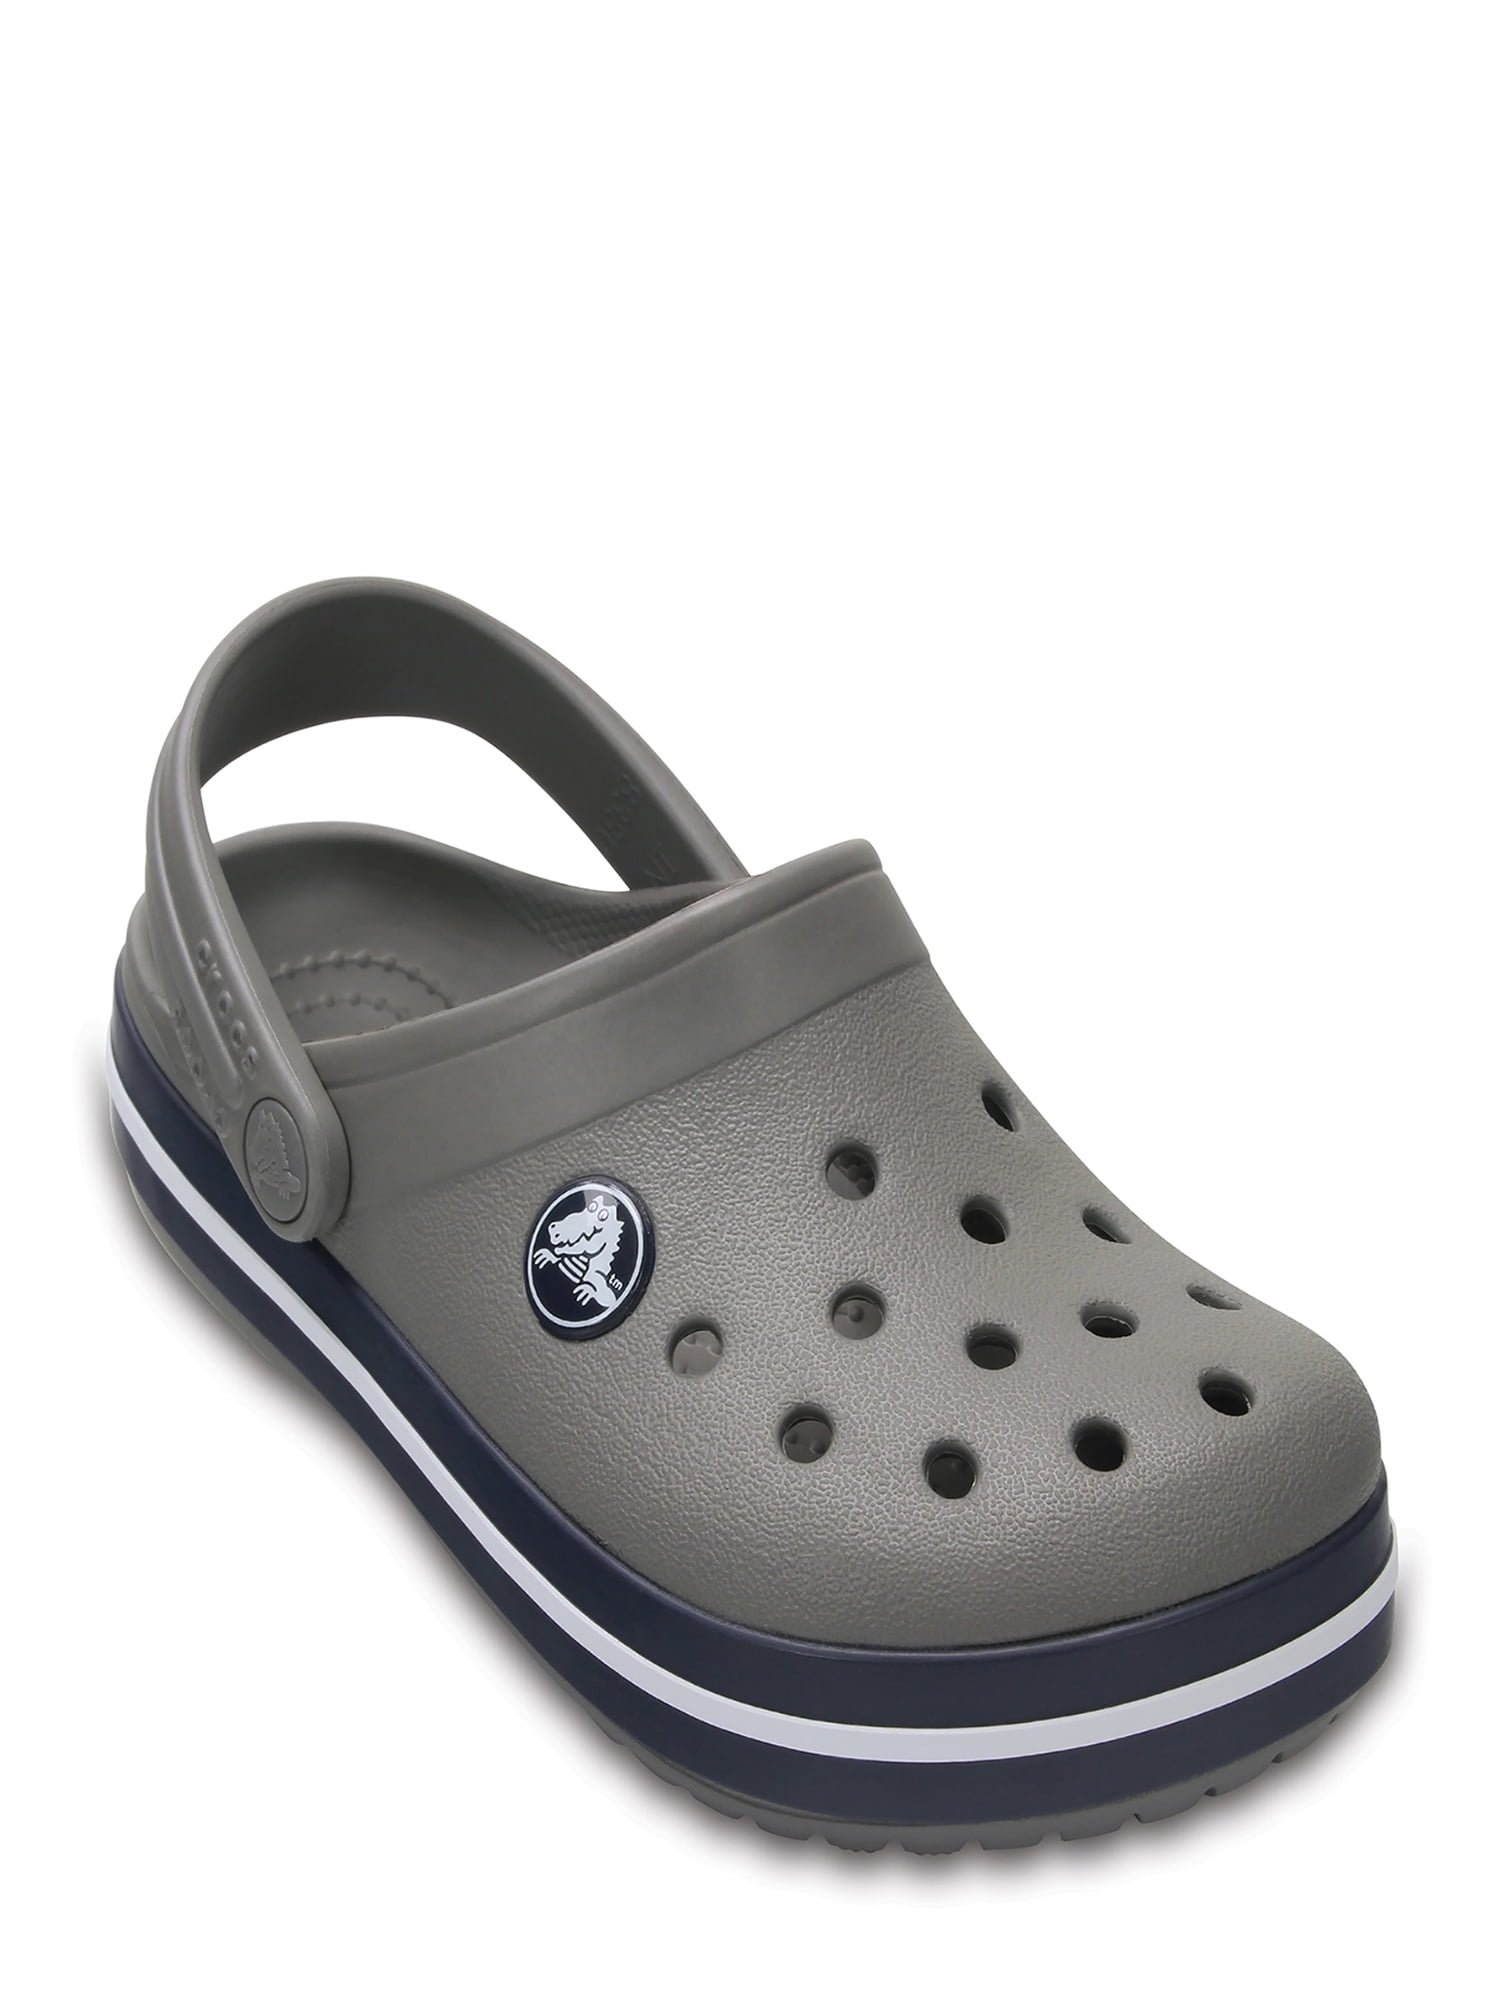 does walmart have crocs in store